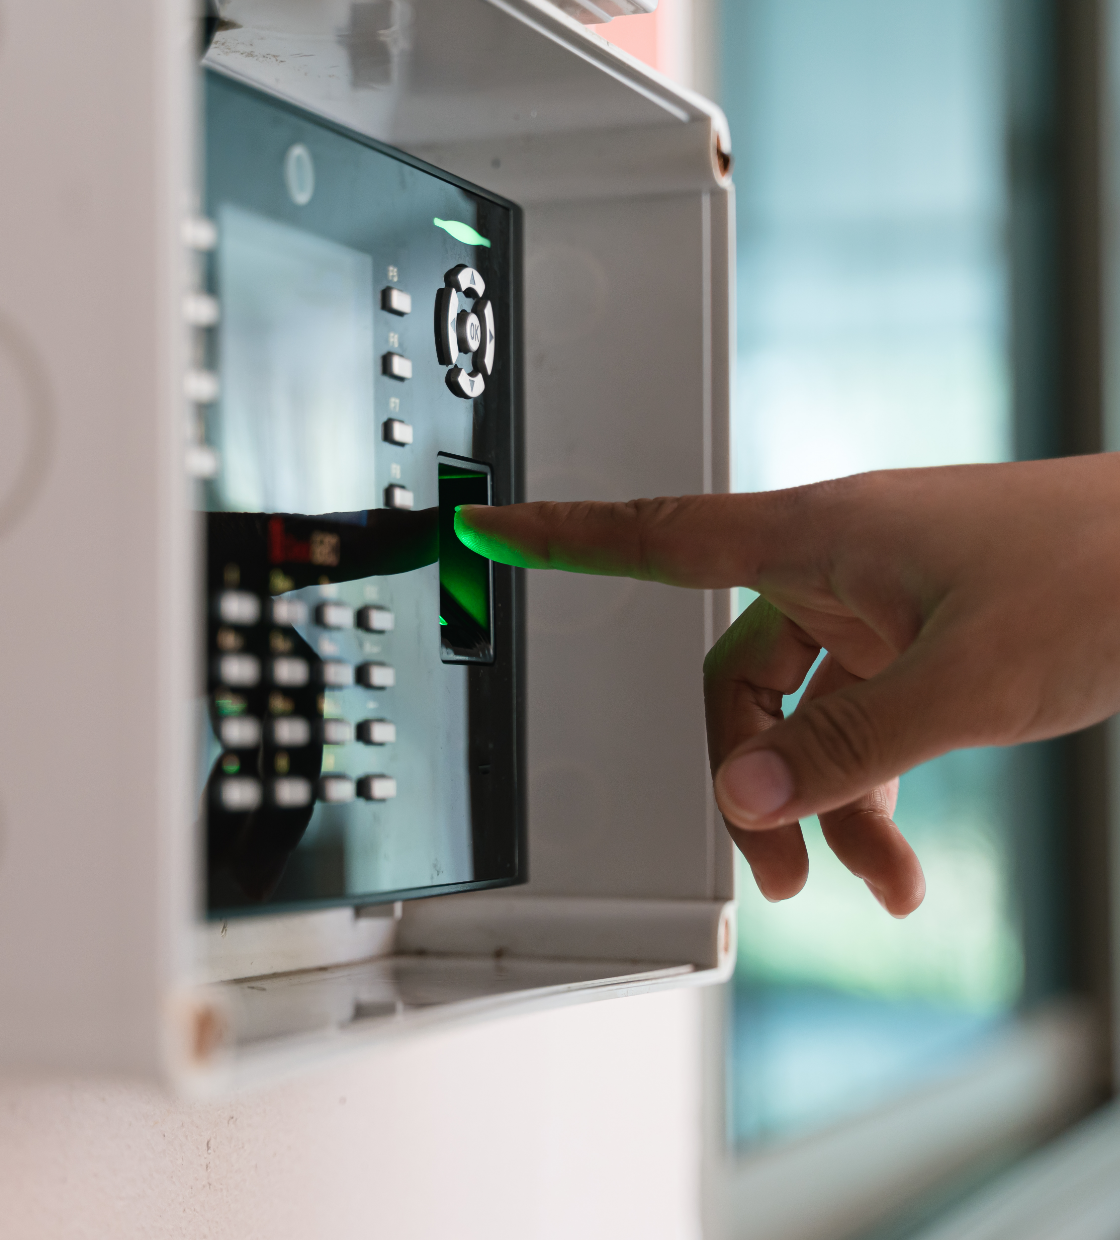 Access control system